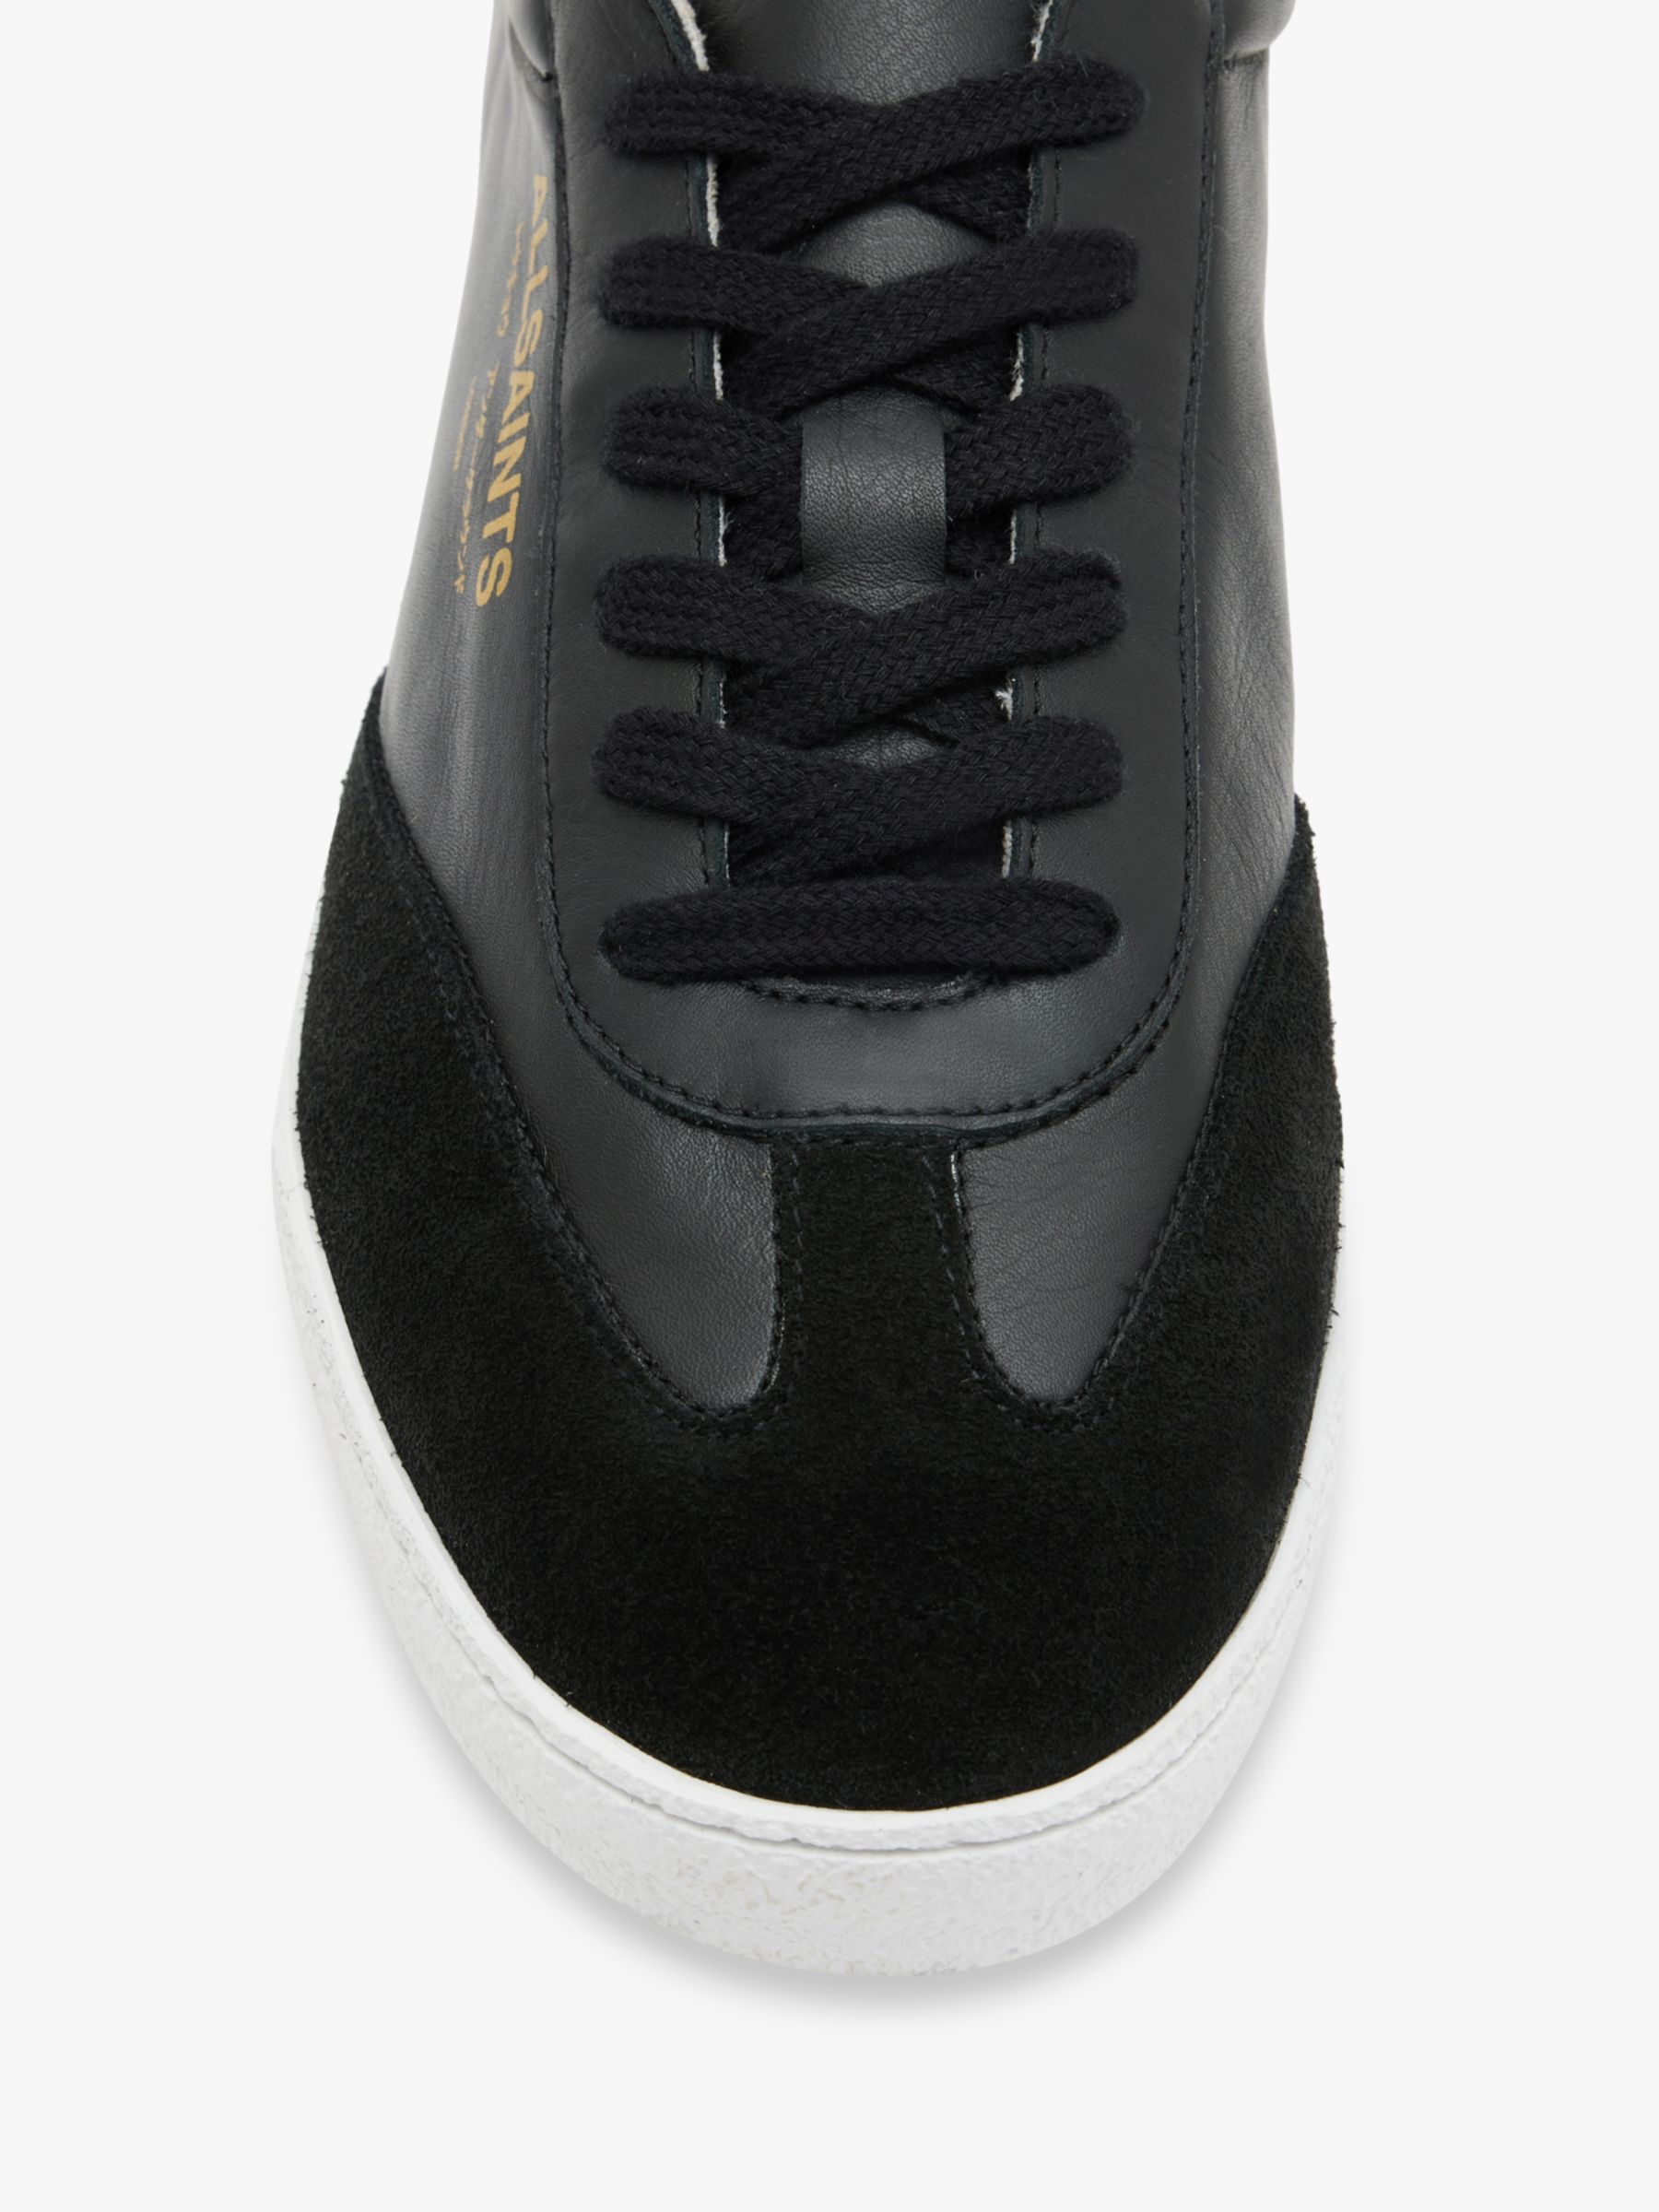 Buy AllSaints Thelma Leather Trainers Online at johnlewis.com